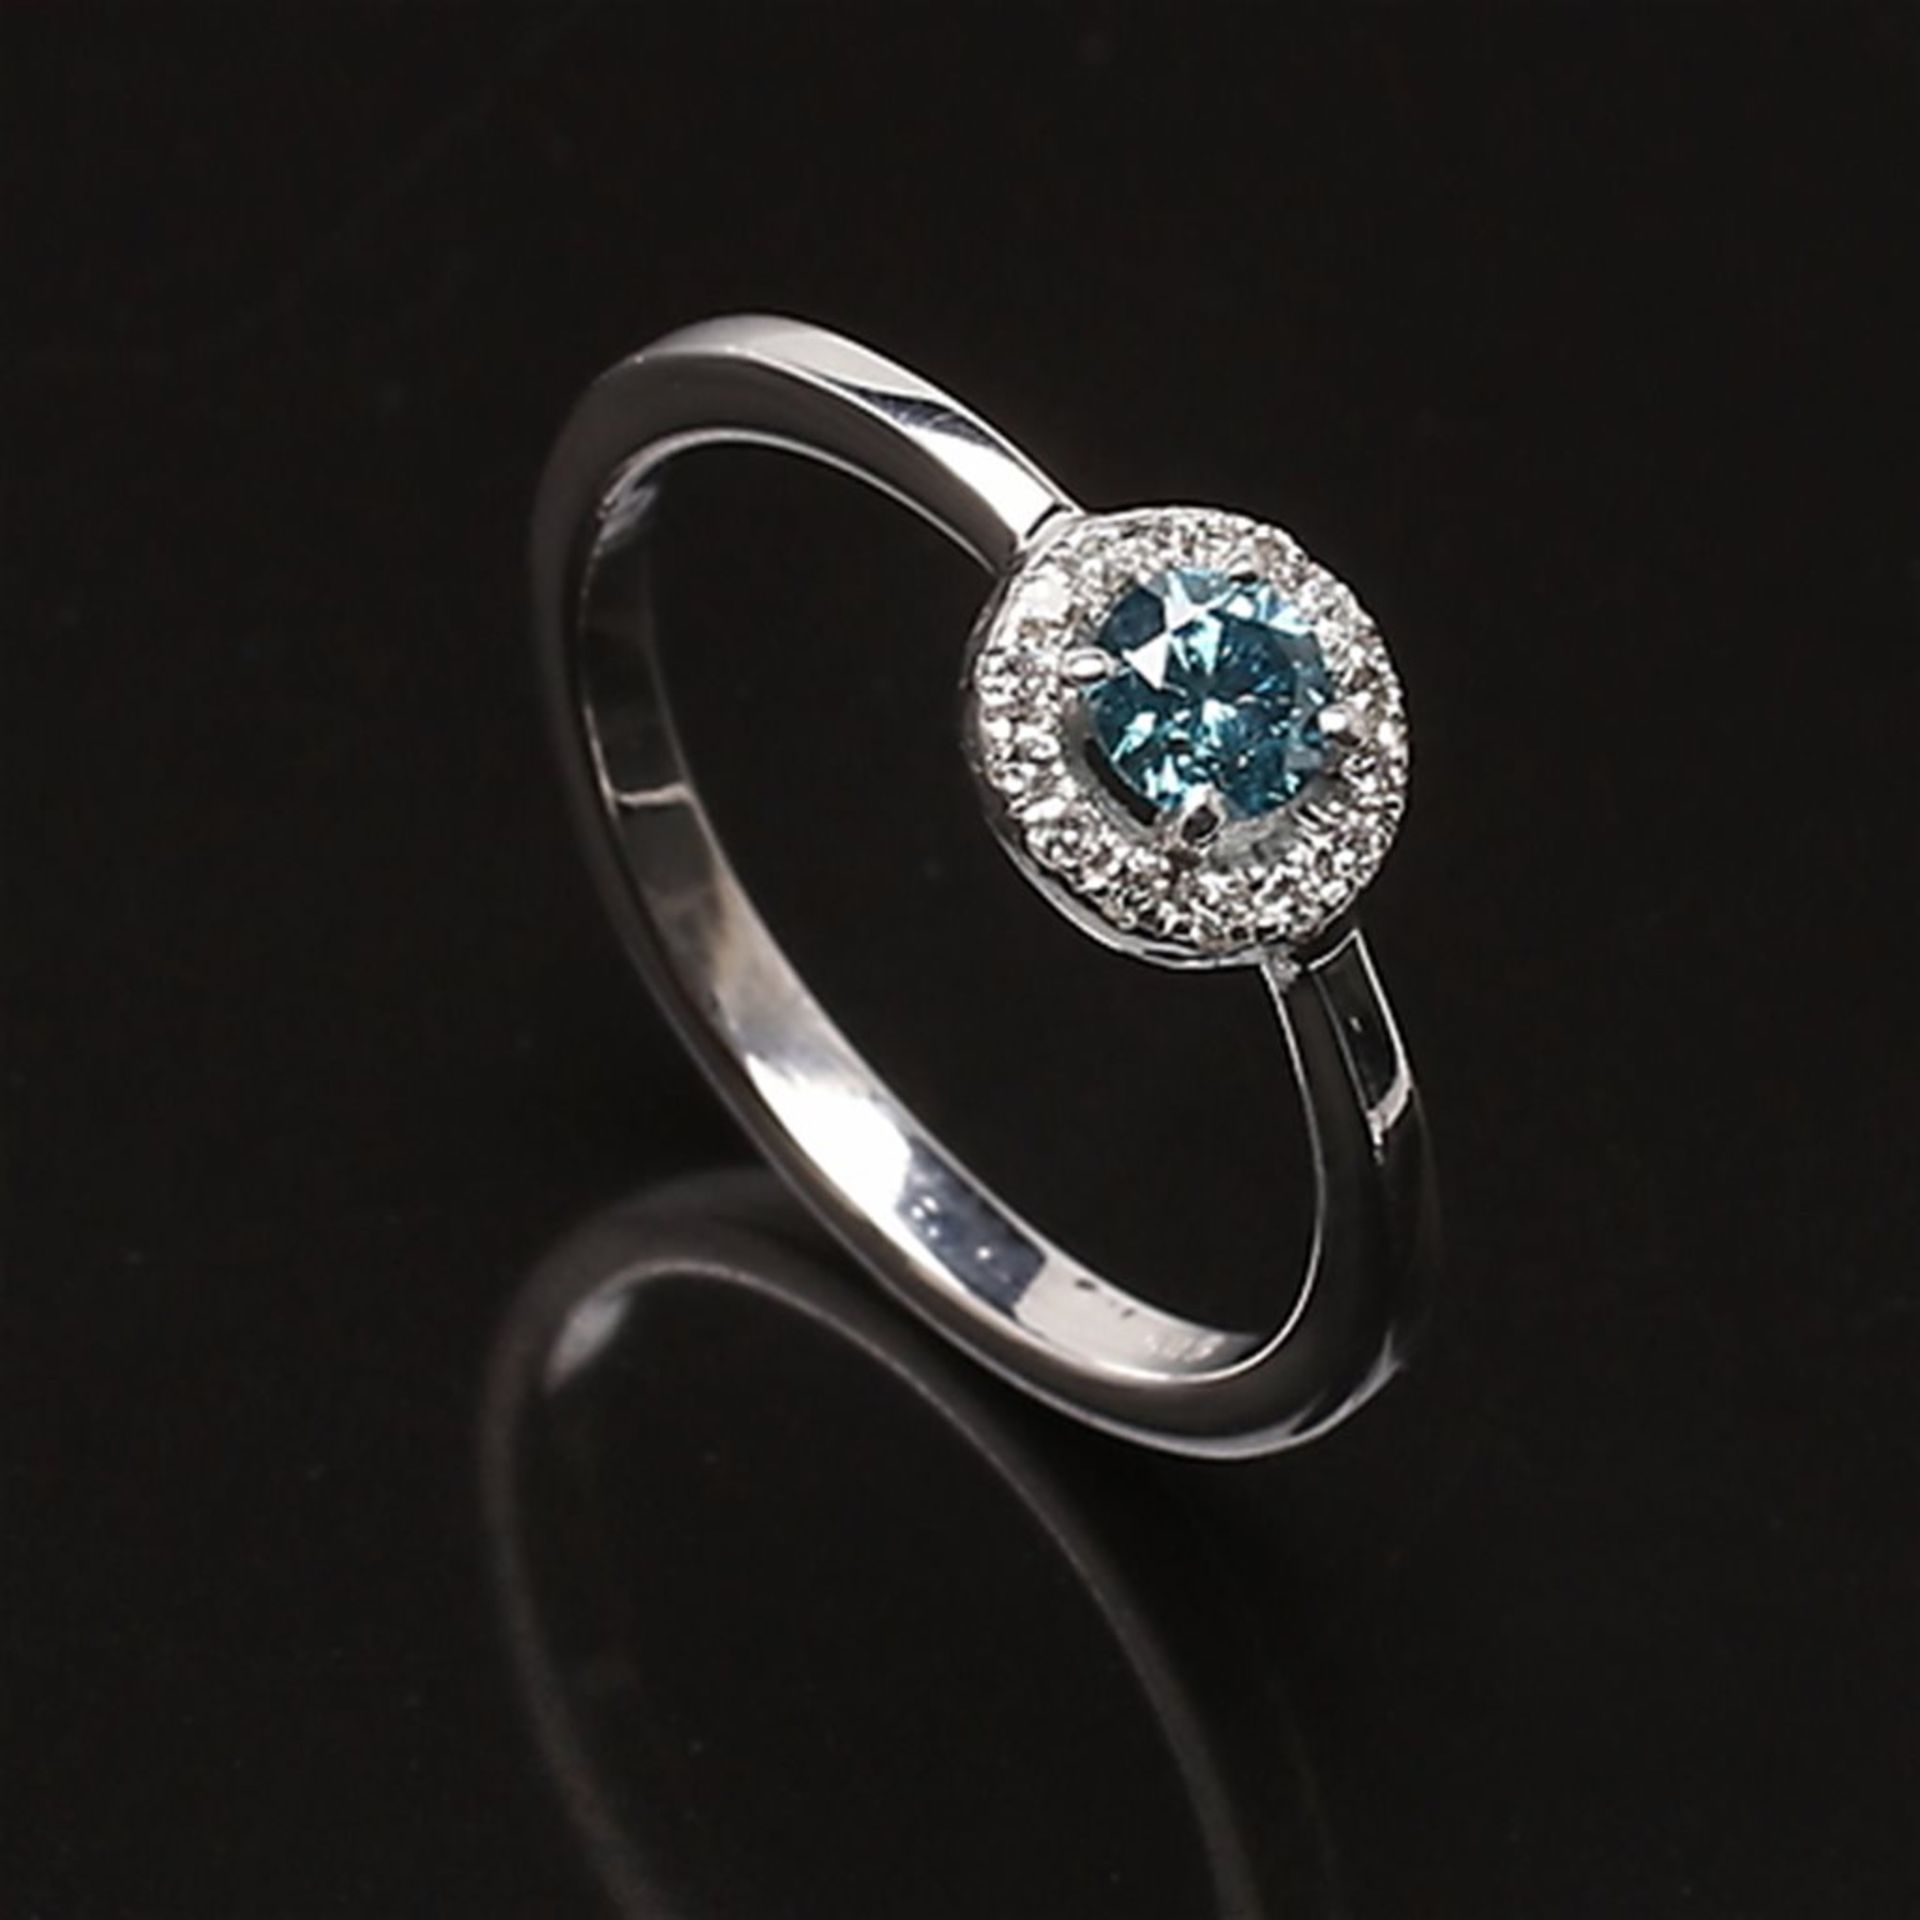 Ring in white gold with diamonds totaling 0.39 ct. - Image 2 of 2